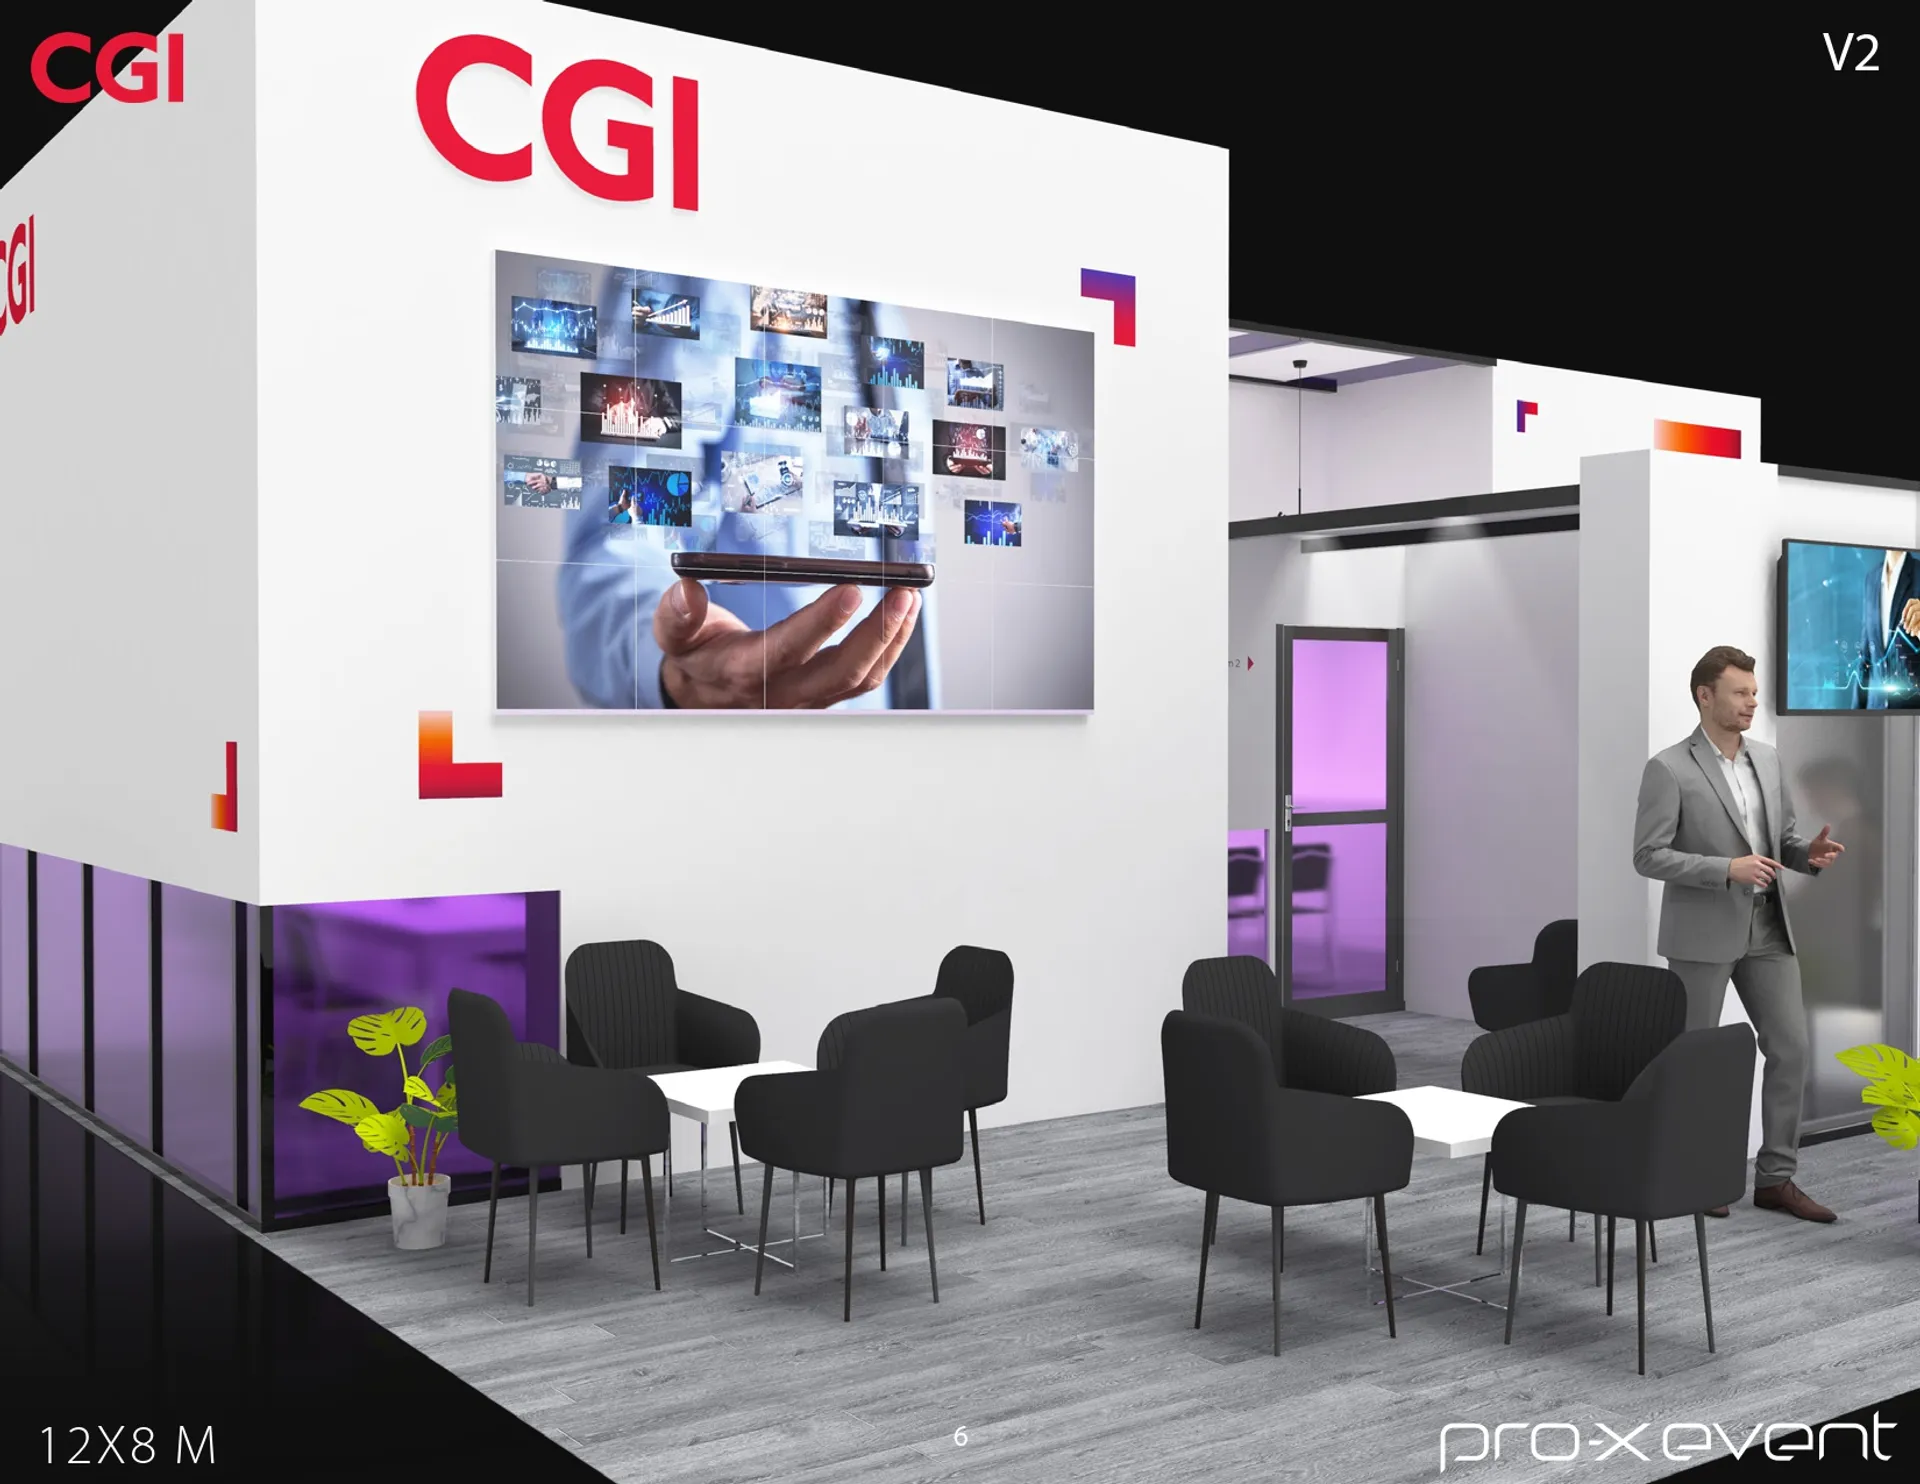 booth-design-projects/Pro-X Exhibits/2024-04-11-30x40-INLINE-Project-47/CGI_SIBOS 2023_12X8 M_2023_PROX_V2-6_page-0001-jhtv6r.jpg